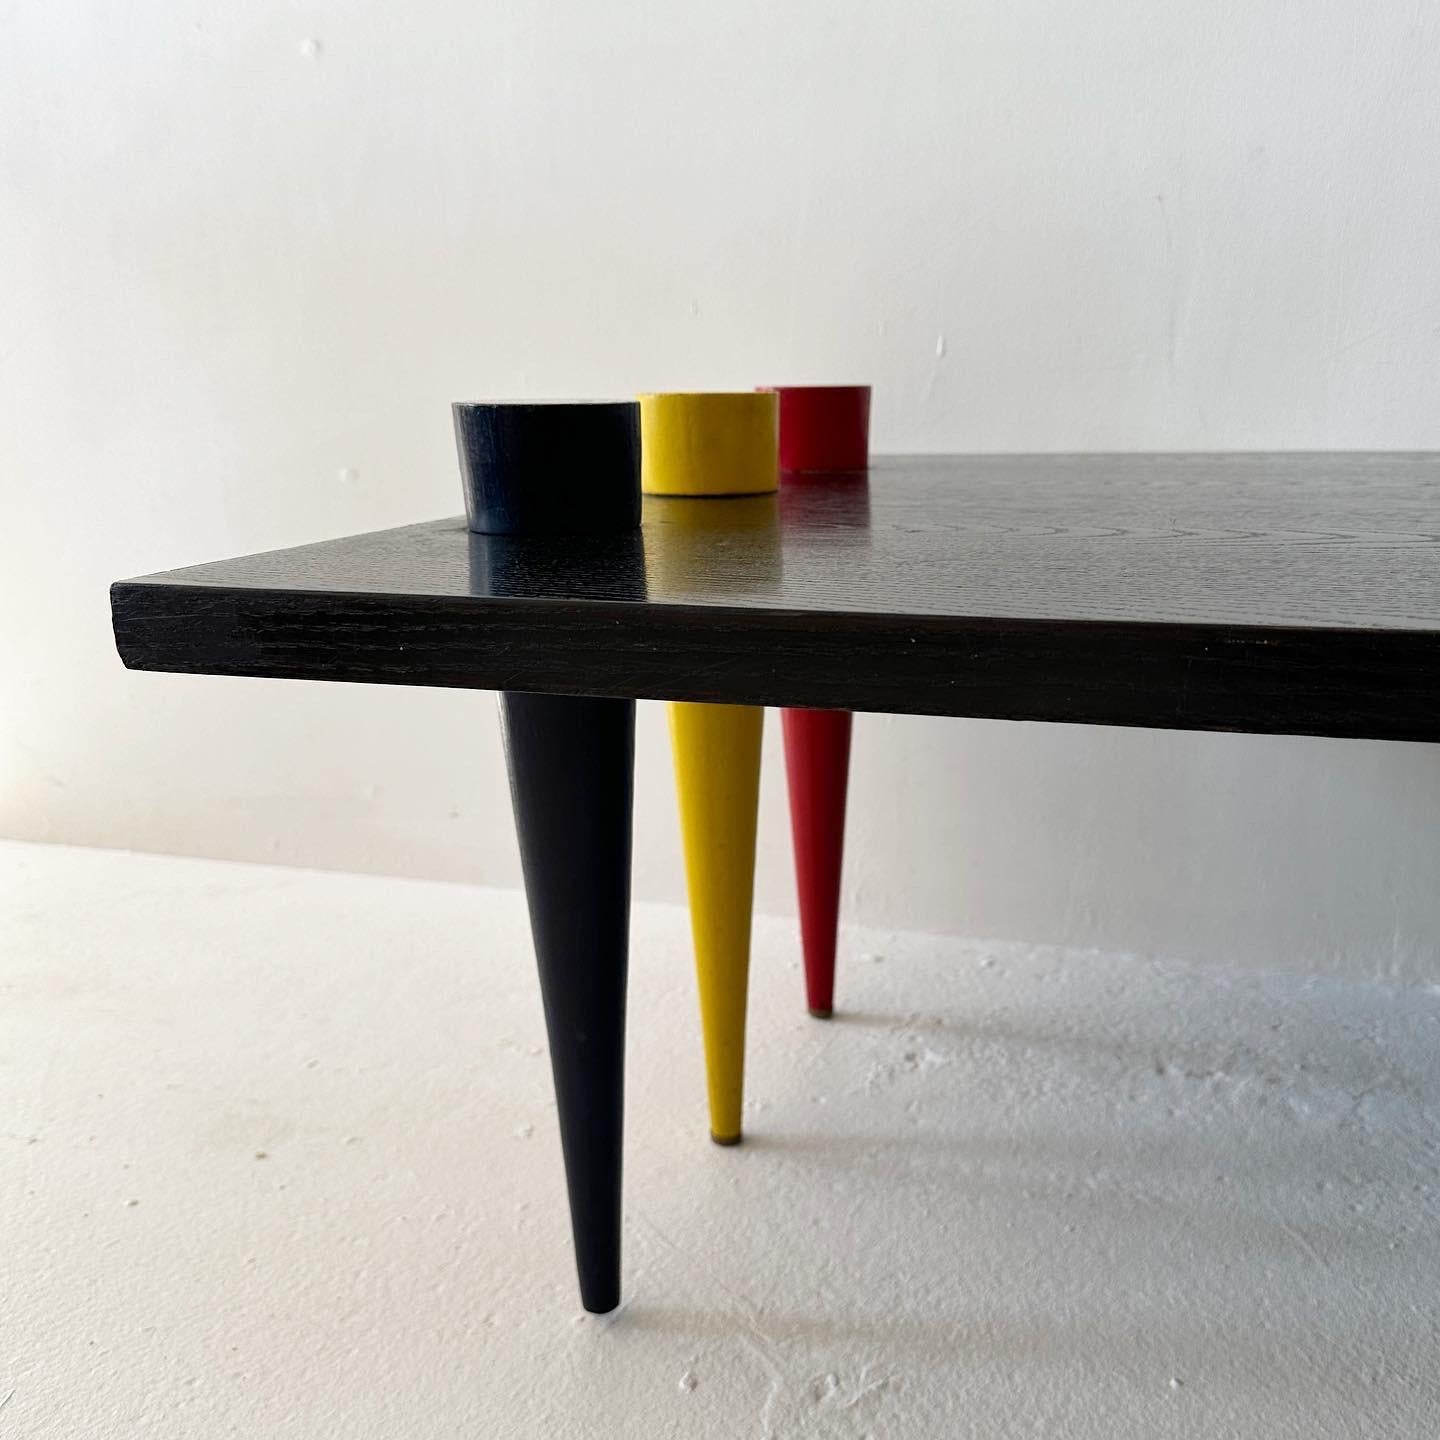 Ebonized wood waterfall coffee table with primary color conical legs. Kind of De Stilj energy.
​
L50 D28 H14 (table top - legs go up 2 more)